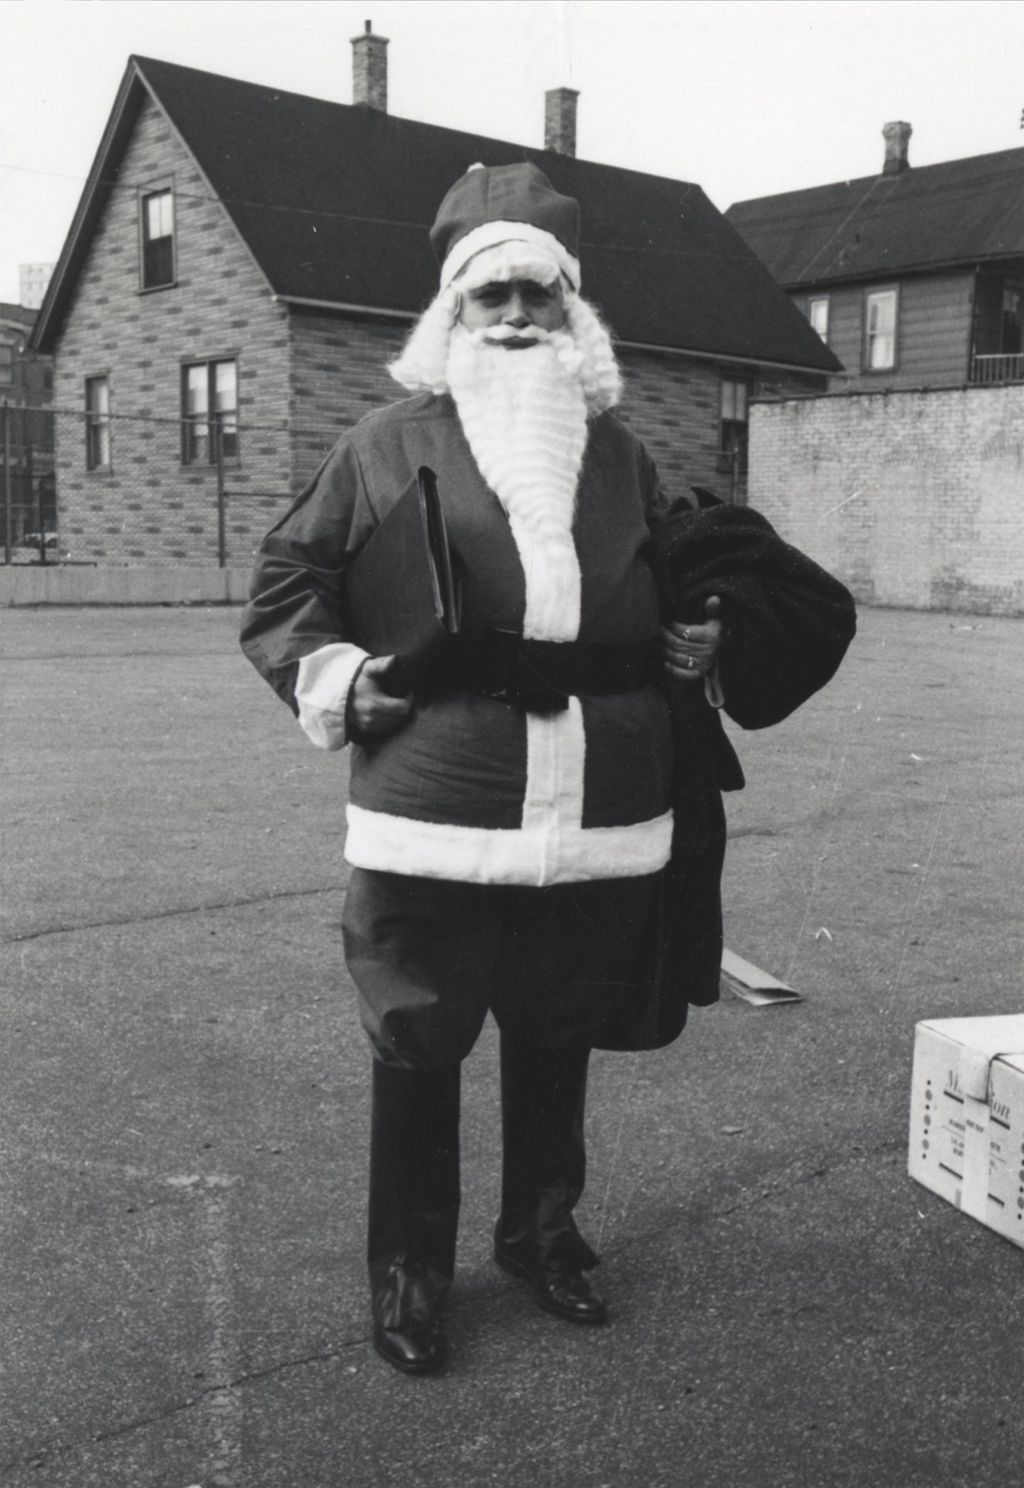 Man in Santa Claus costume standing in an empty lot for a Hull-House Christmas toy giveaway